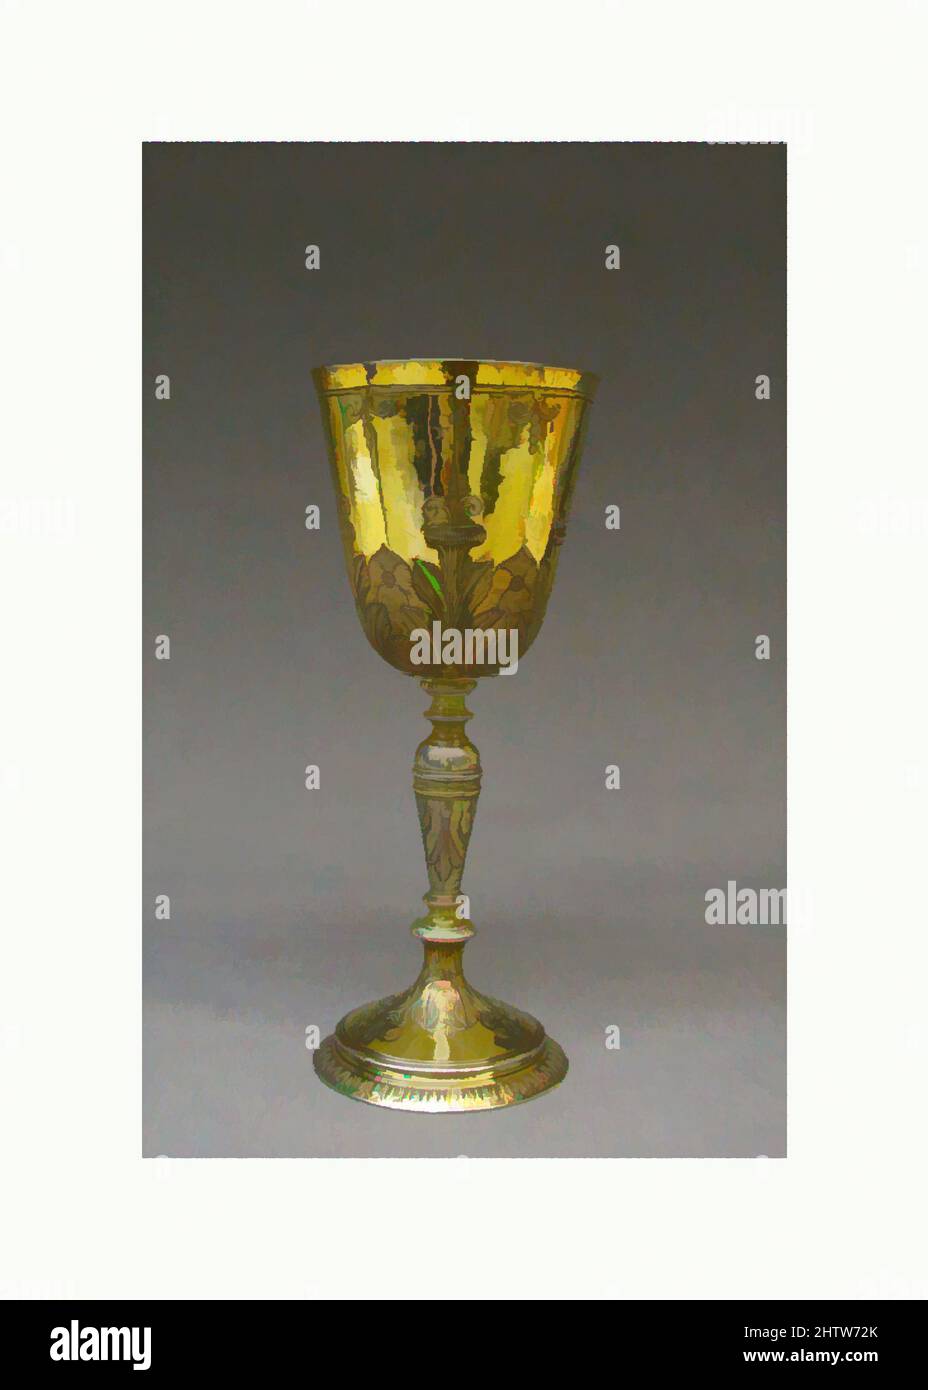 Art inspired by Standing cup, 1615–16, British, London, Silver gilt, Height: 9 1/8 in. (23.2 cm), Metalwork-Silver, Classic works modernized by Artotop with a splash of modernity. Shapes, color and value, eye-catching visual impact on art. Emotions through freedom of artworks in a contemporary way. A timeless message pursuing a wildly creative new direction. Artists turning to the digital medium and creating the Artotop NFT Stock Photo